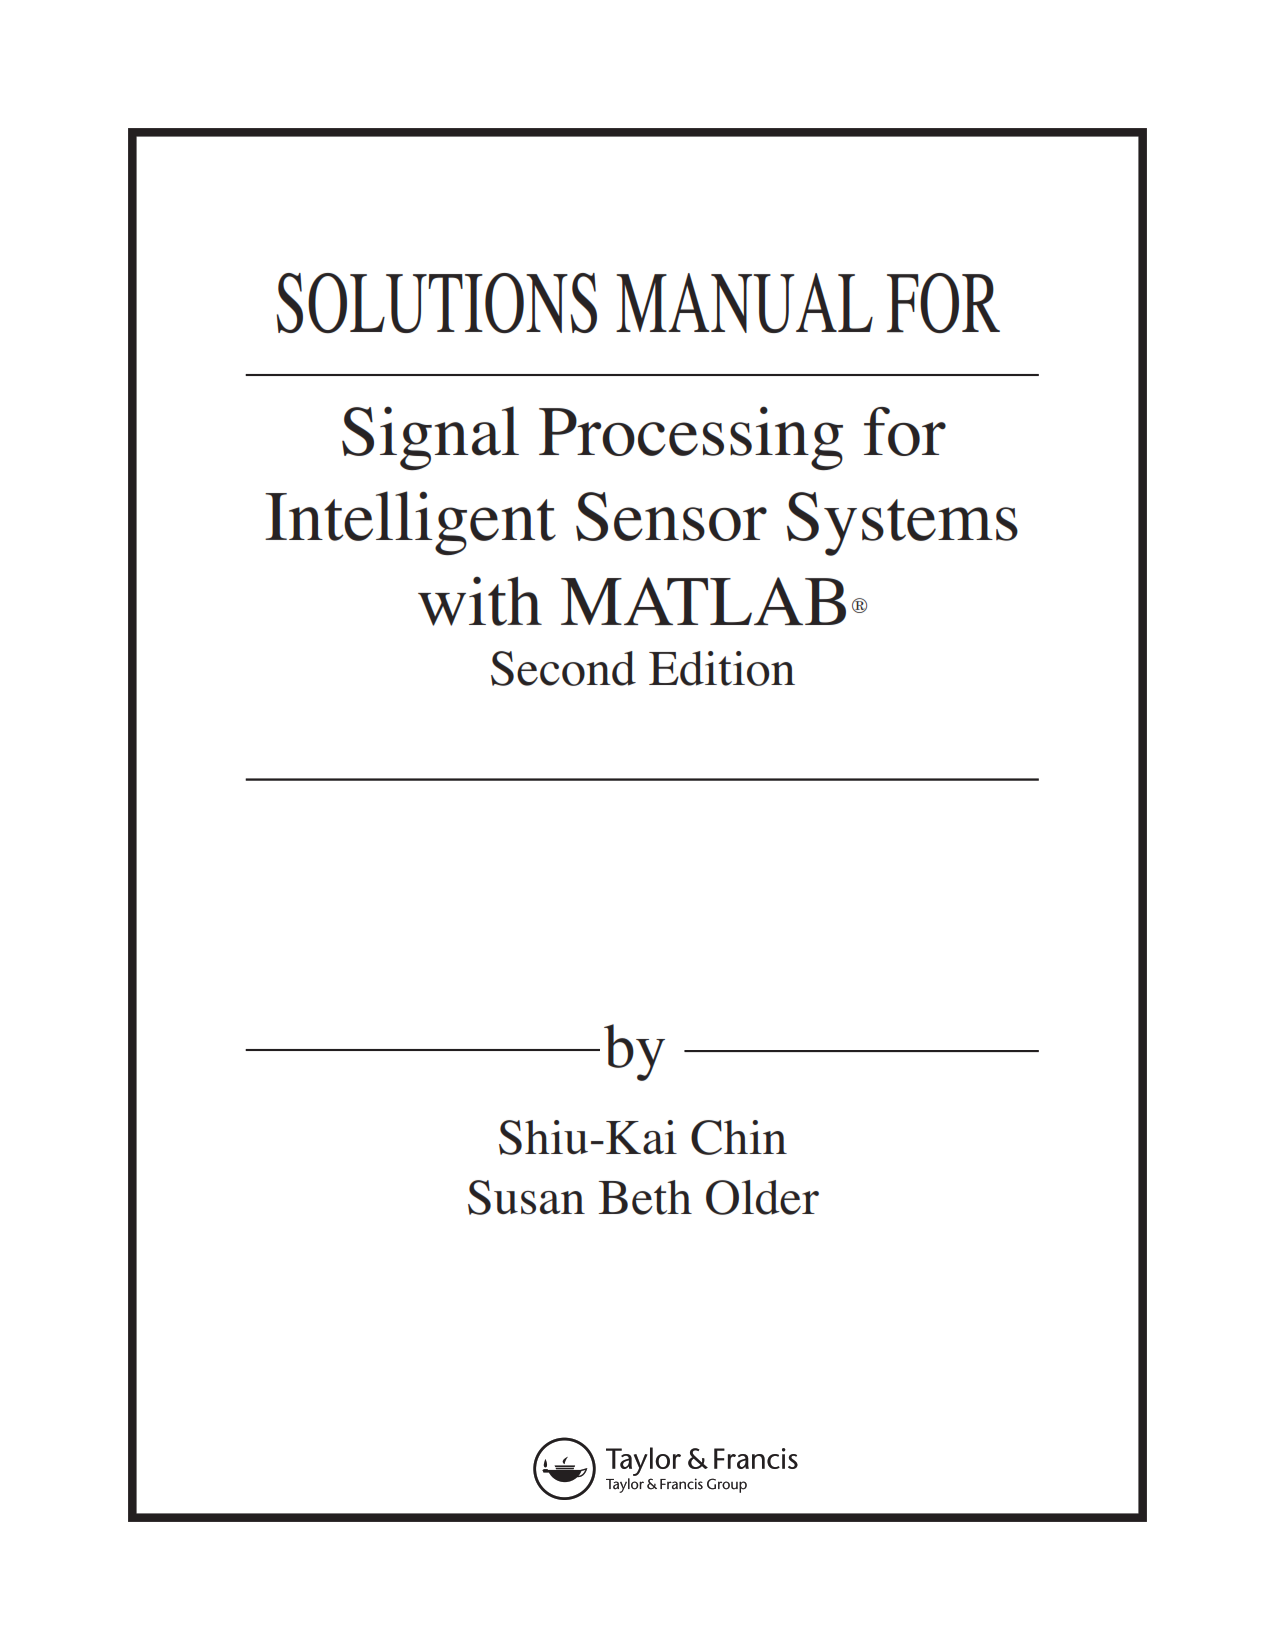 Download free Solution manual of Signal Processing for Intelligent Sensor Systems with MATLAB 2nd edition by David C. Swanson pdf | solutions